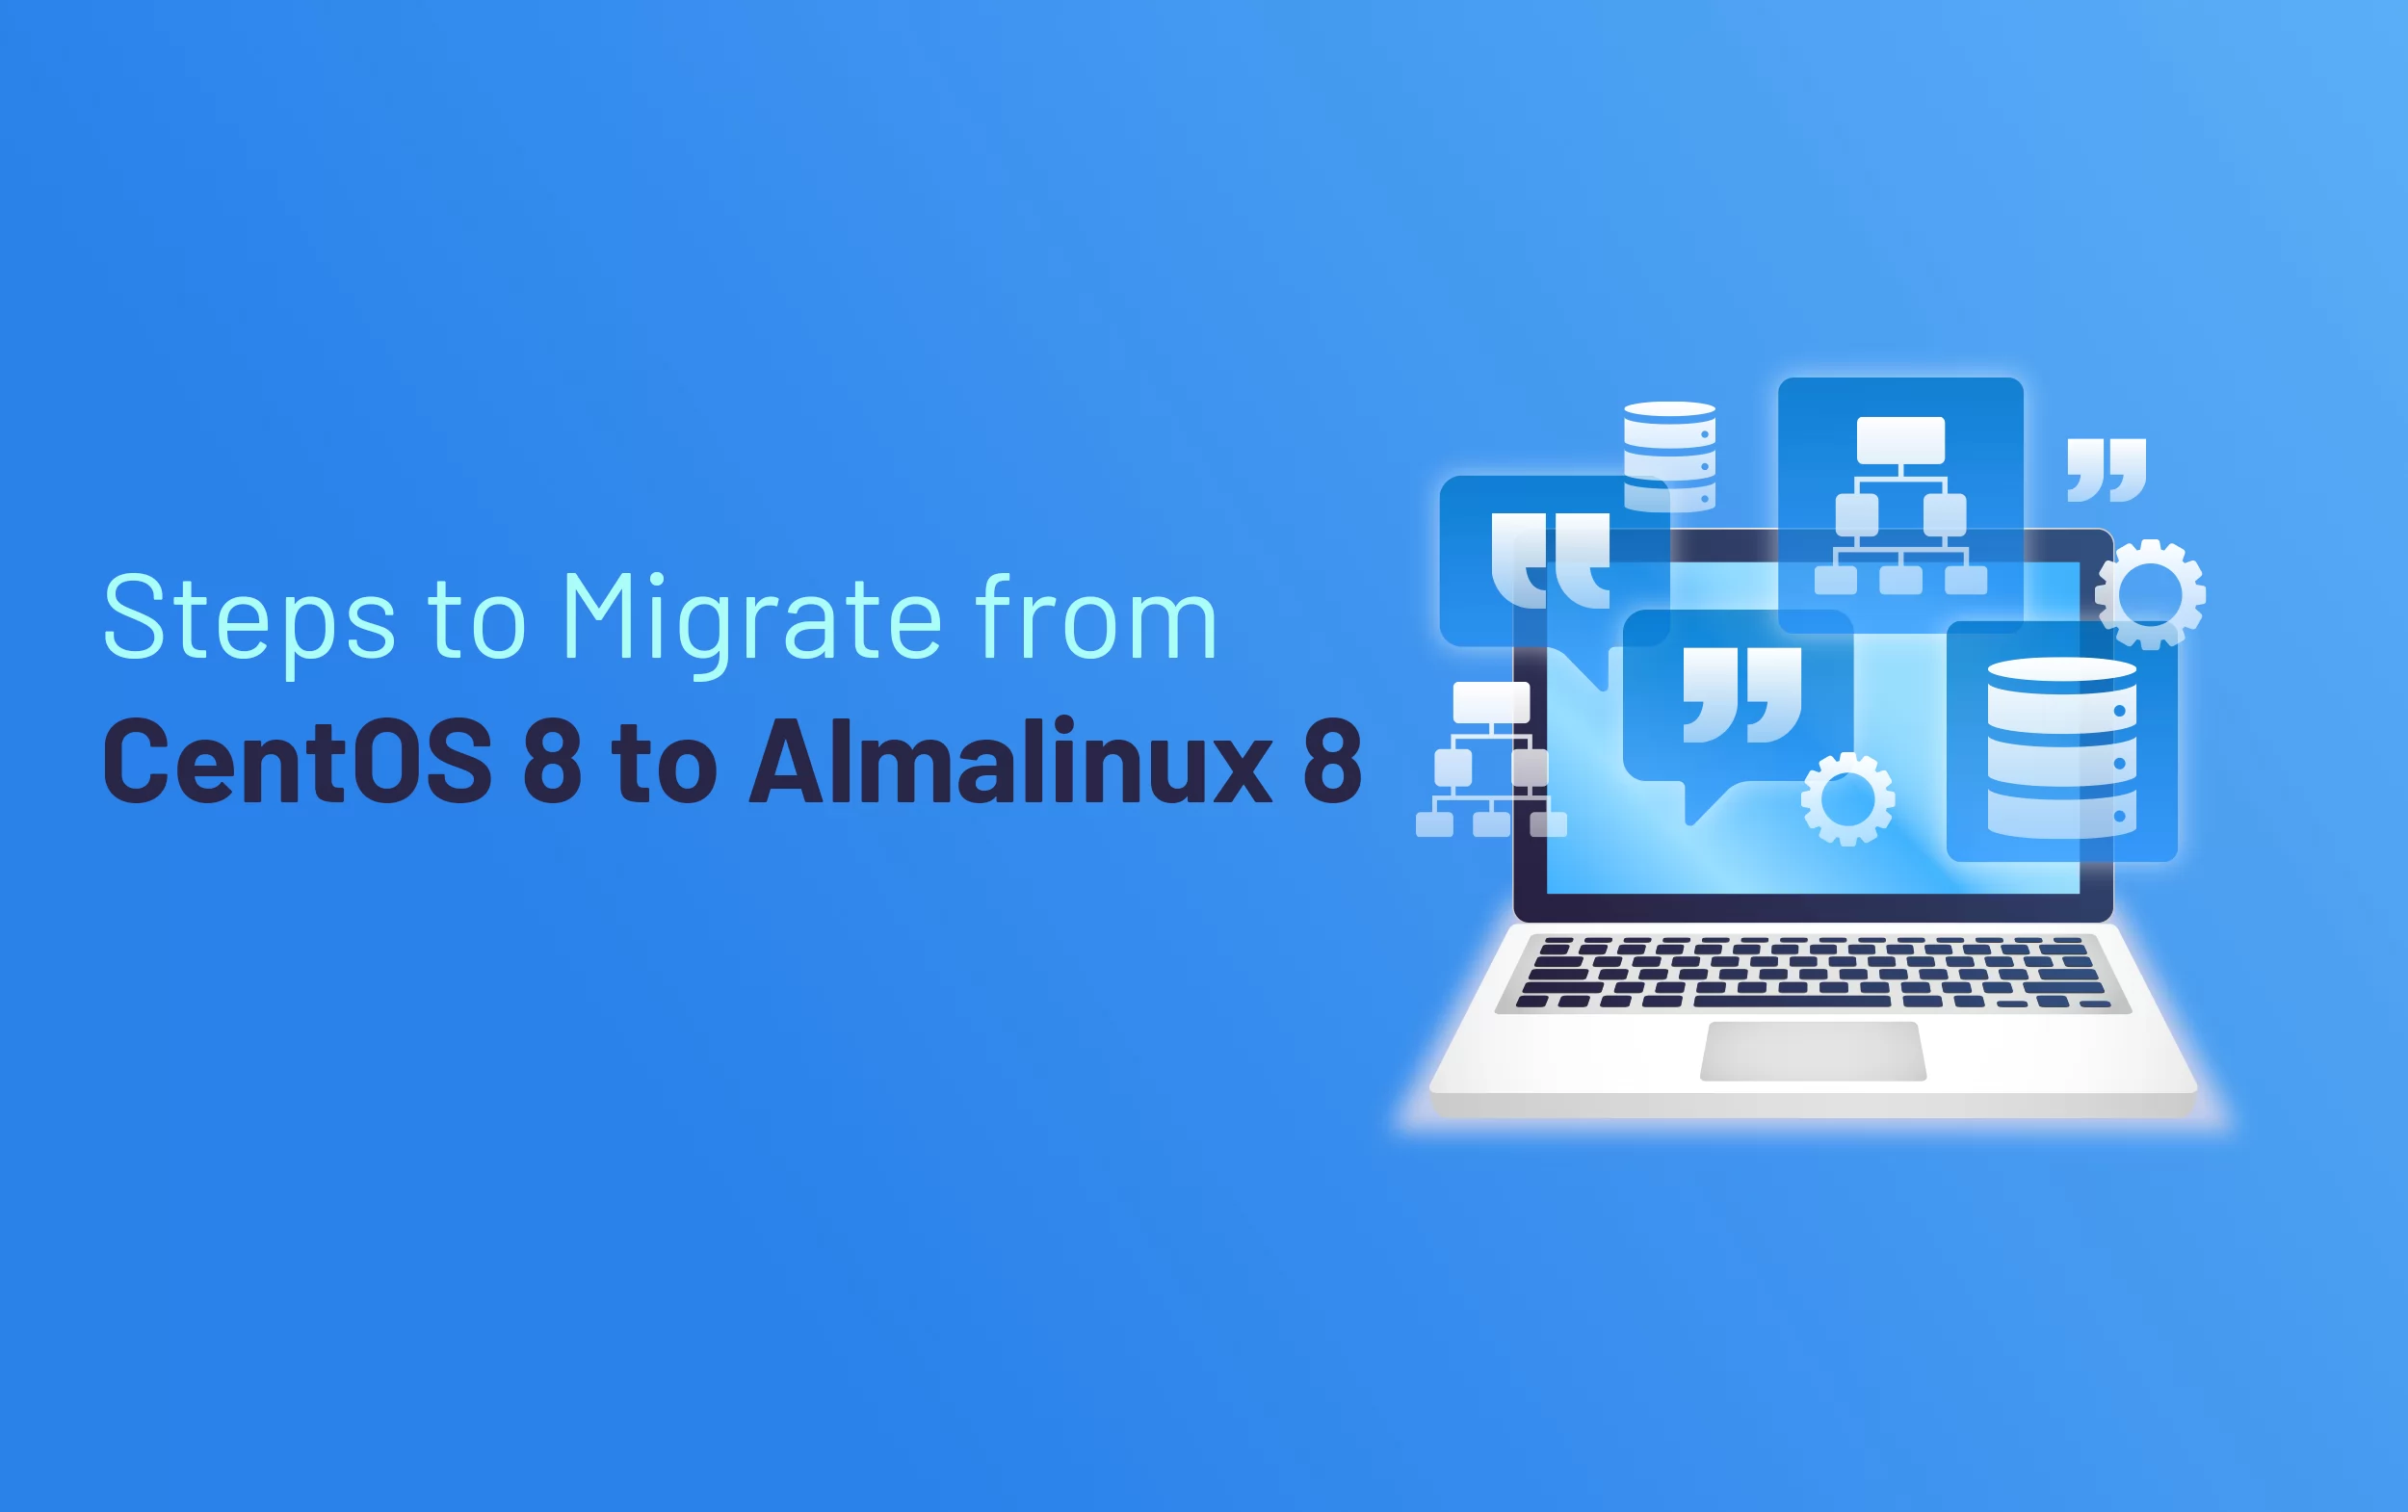 Migrate from CentOS 8 to Almalinux 8